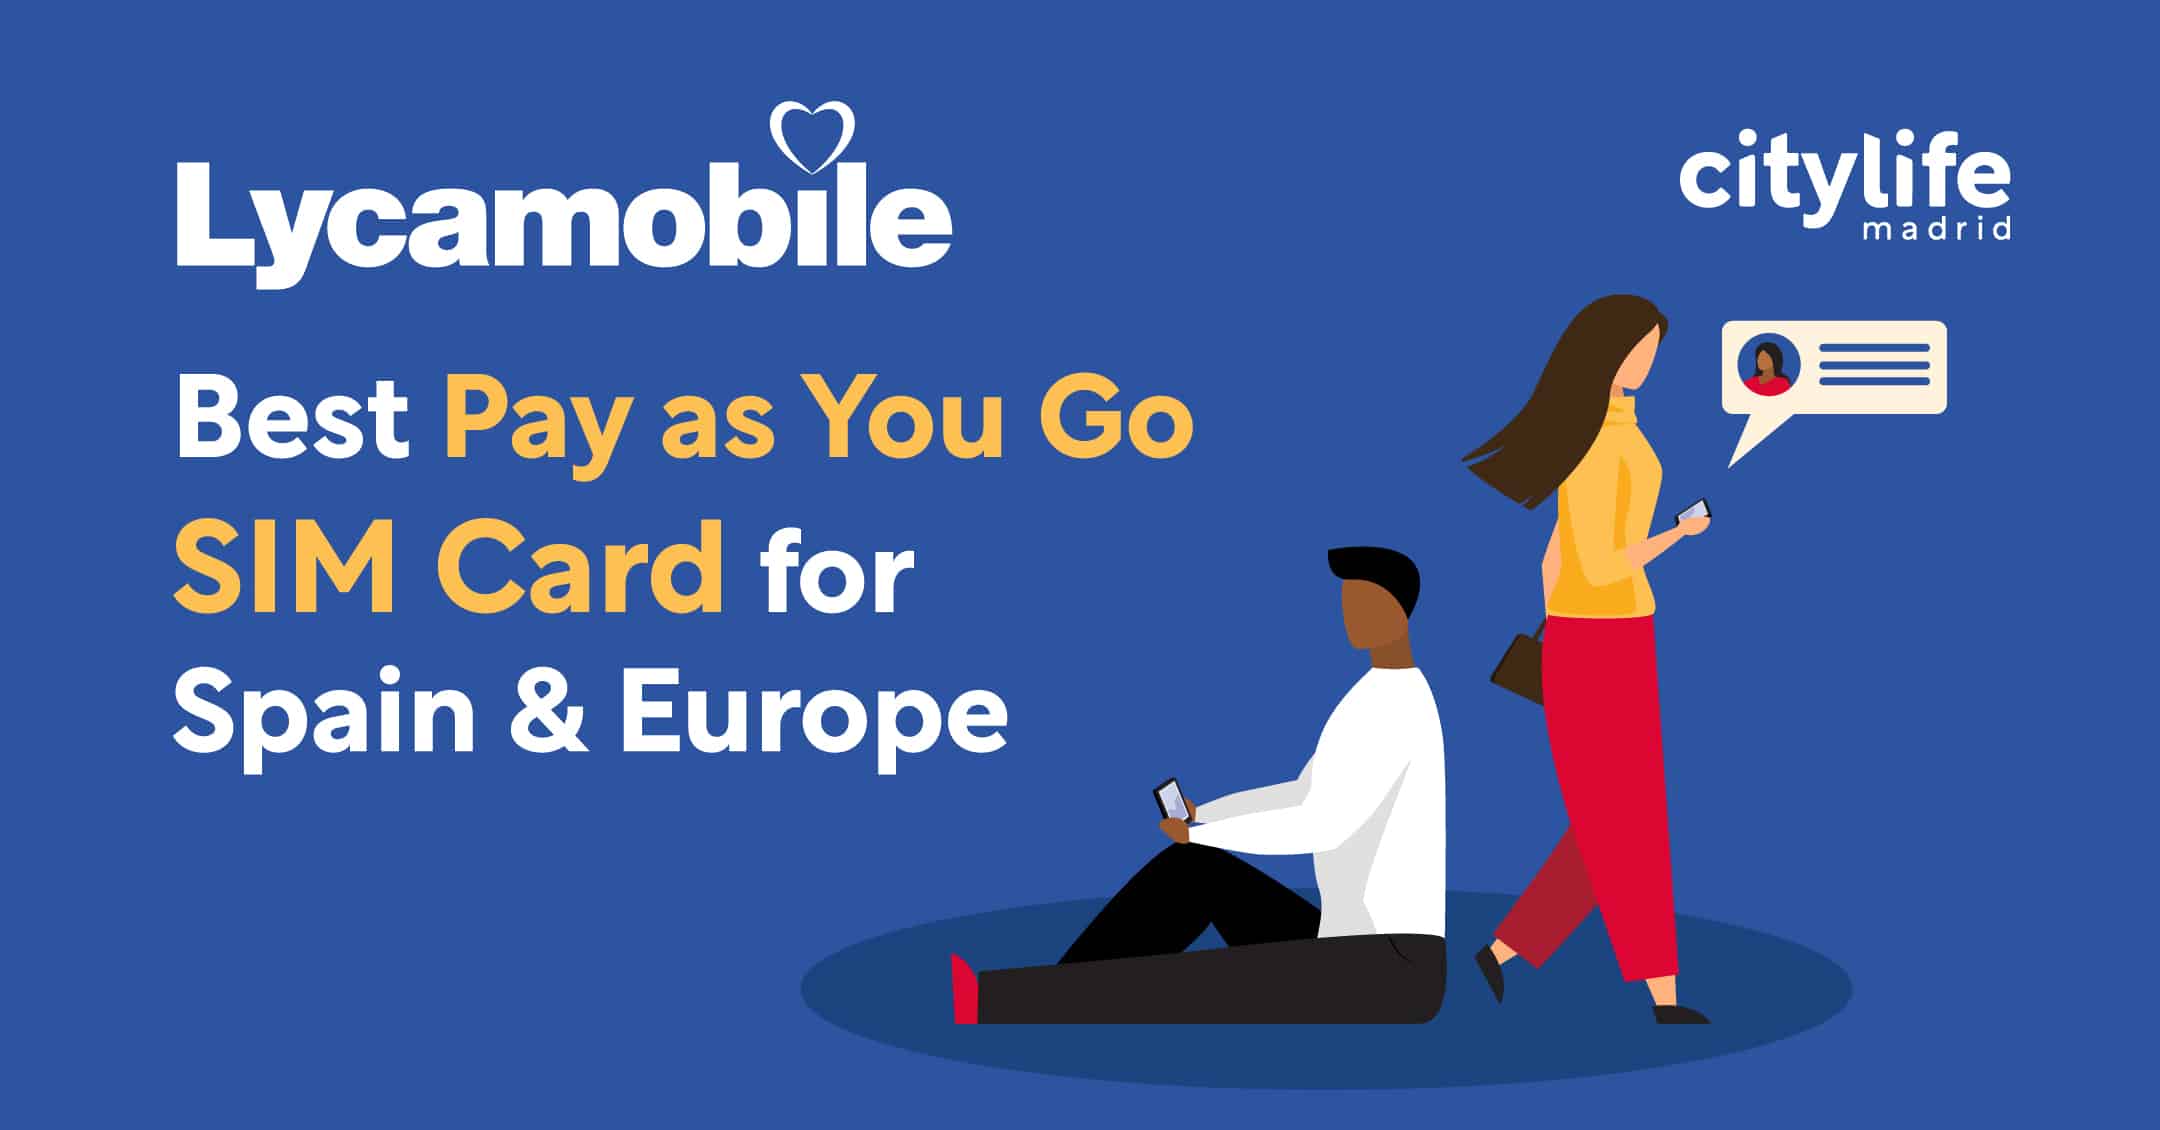 Lycamobile - Best Pay as You Go SIM Card for Spain & Europe